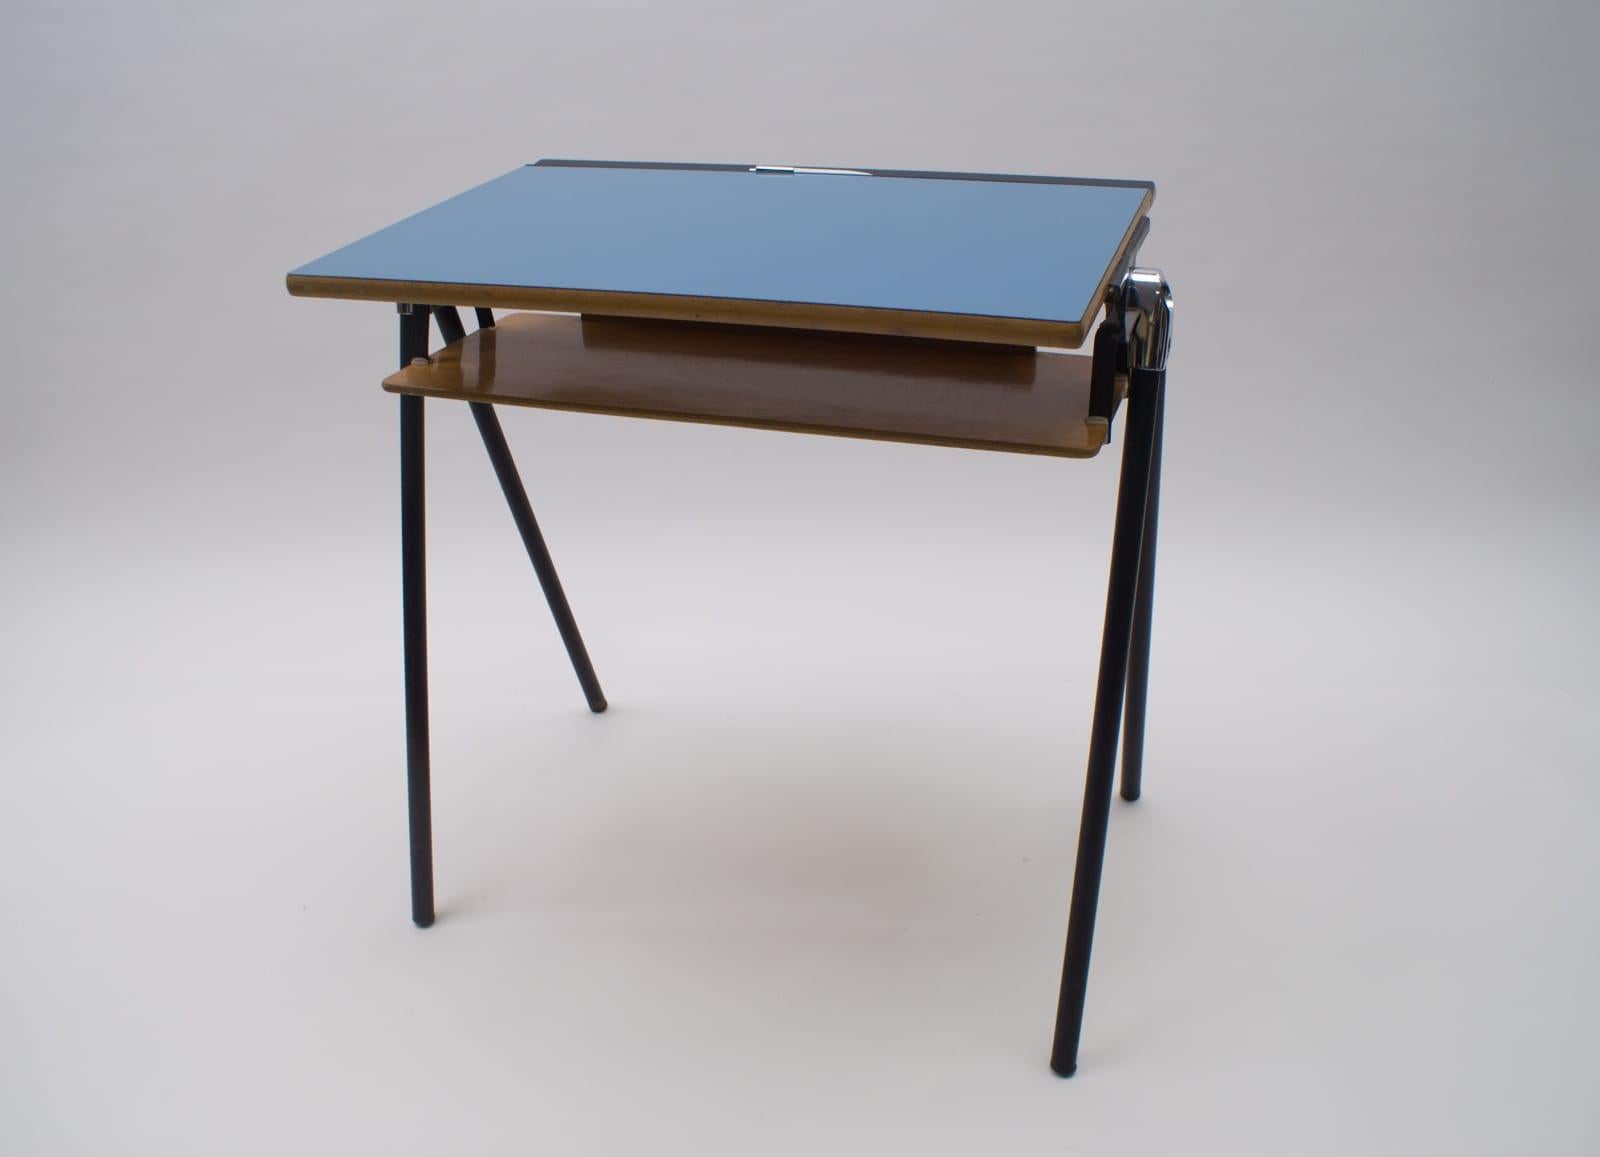 School desk and chair (Palini),
1960

The Castiglionis with Caccia Dominioni presented several prototypes manufactured by Palini including T12 ( with the same pen tray as this one), which was awarded the Compasso d’Oro, 1960. These are stackable